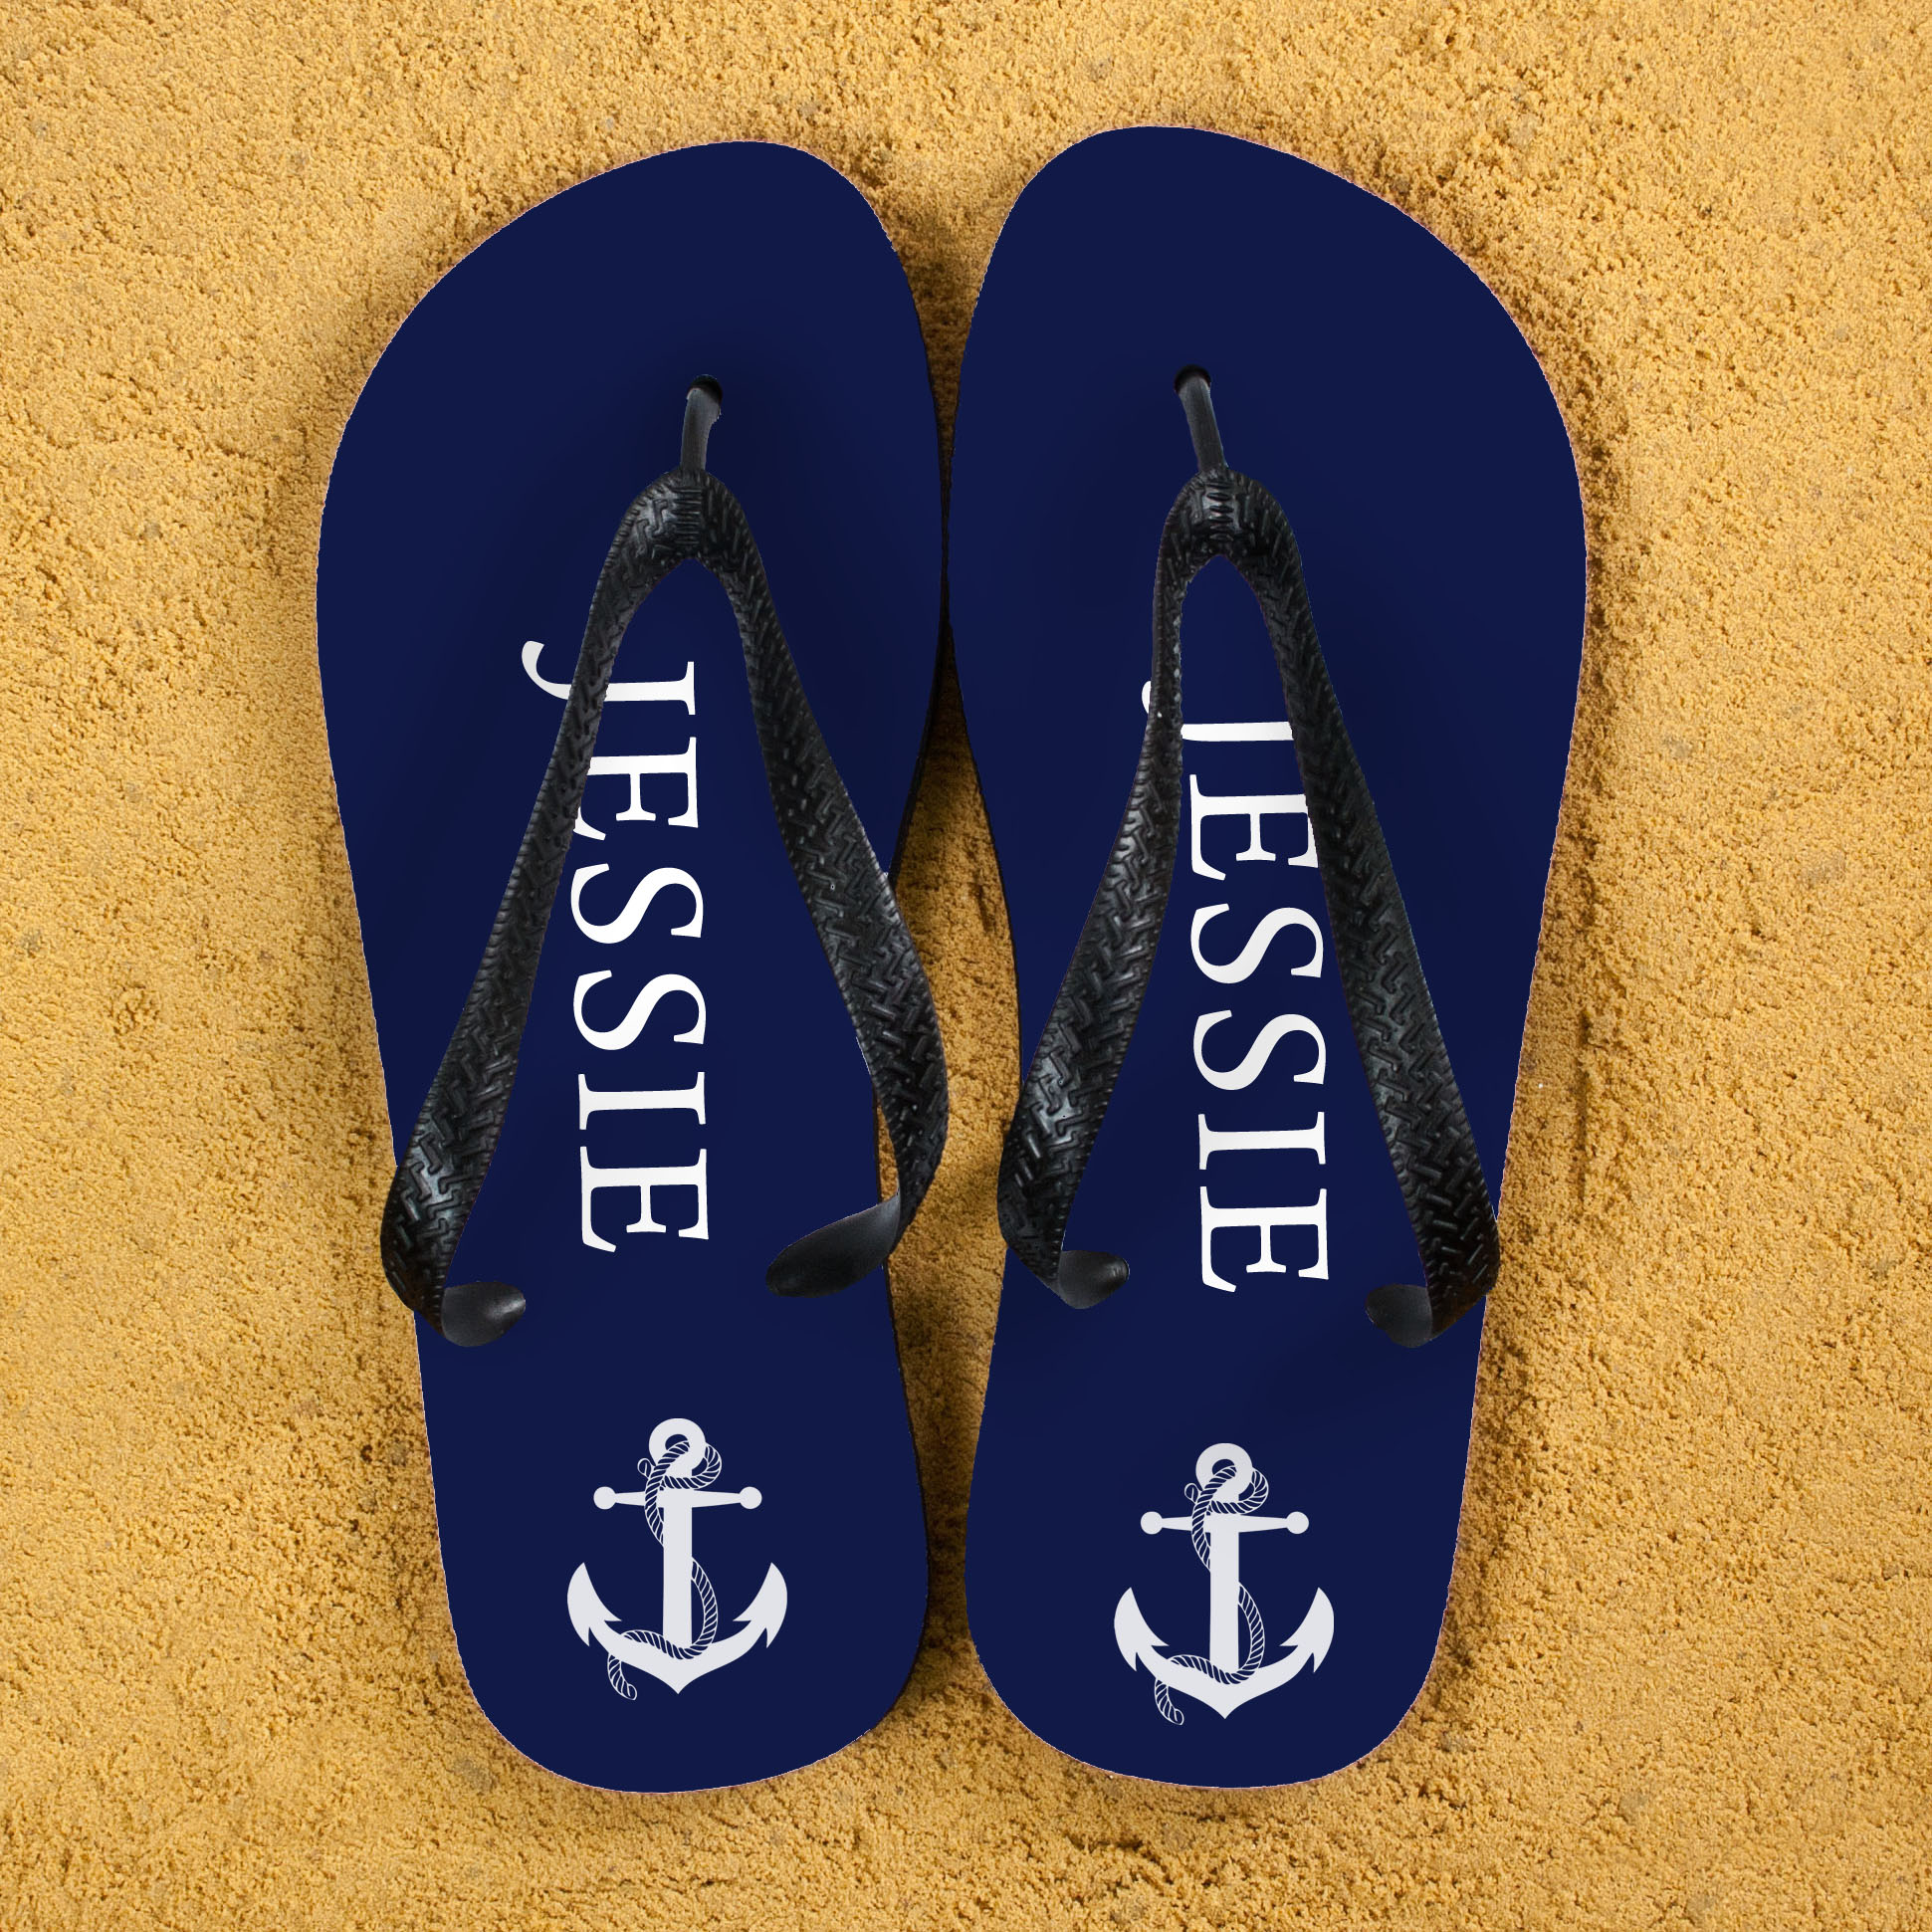 Anchor style Personalised Flip Flops in Blue and White